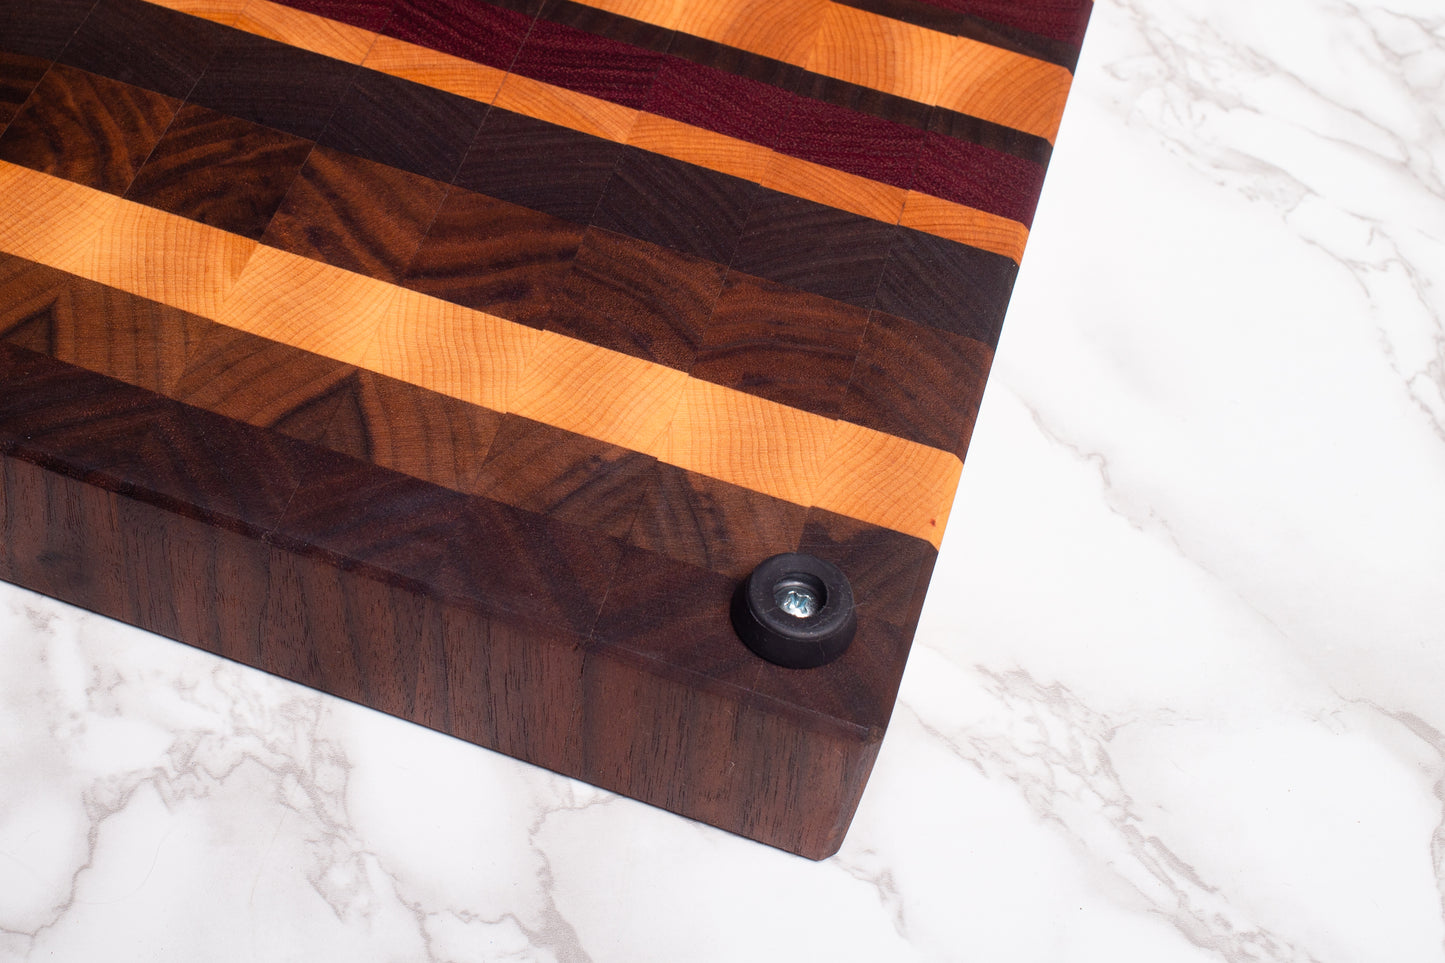 Large Multi-Wood Endgrain Cutting Board with Well and Rubber Feet